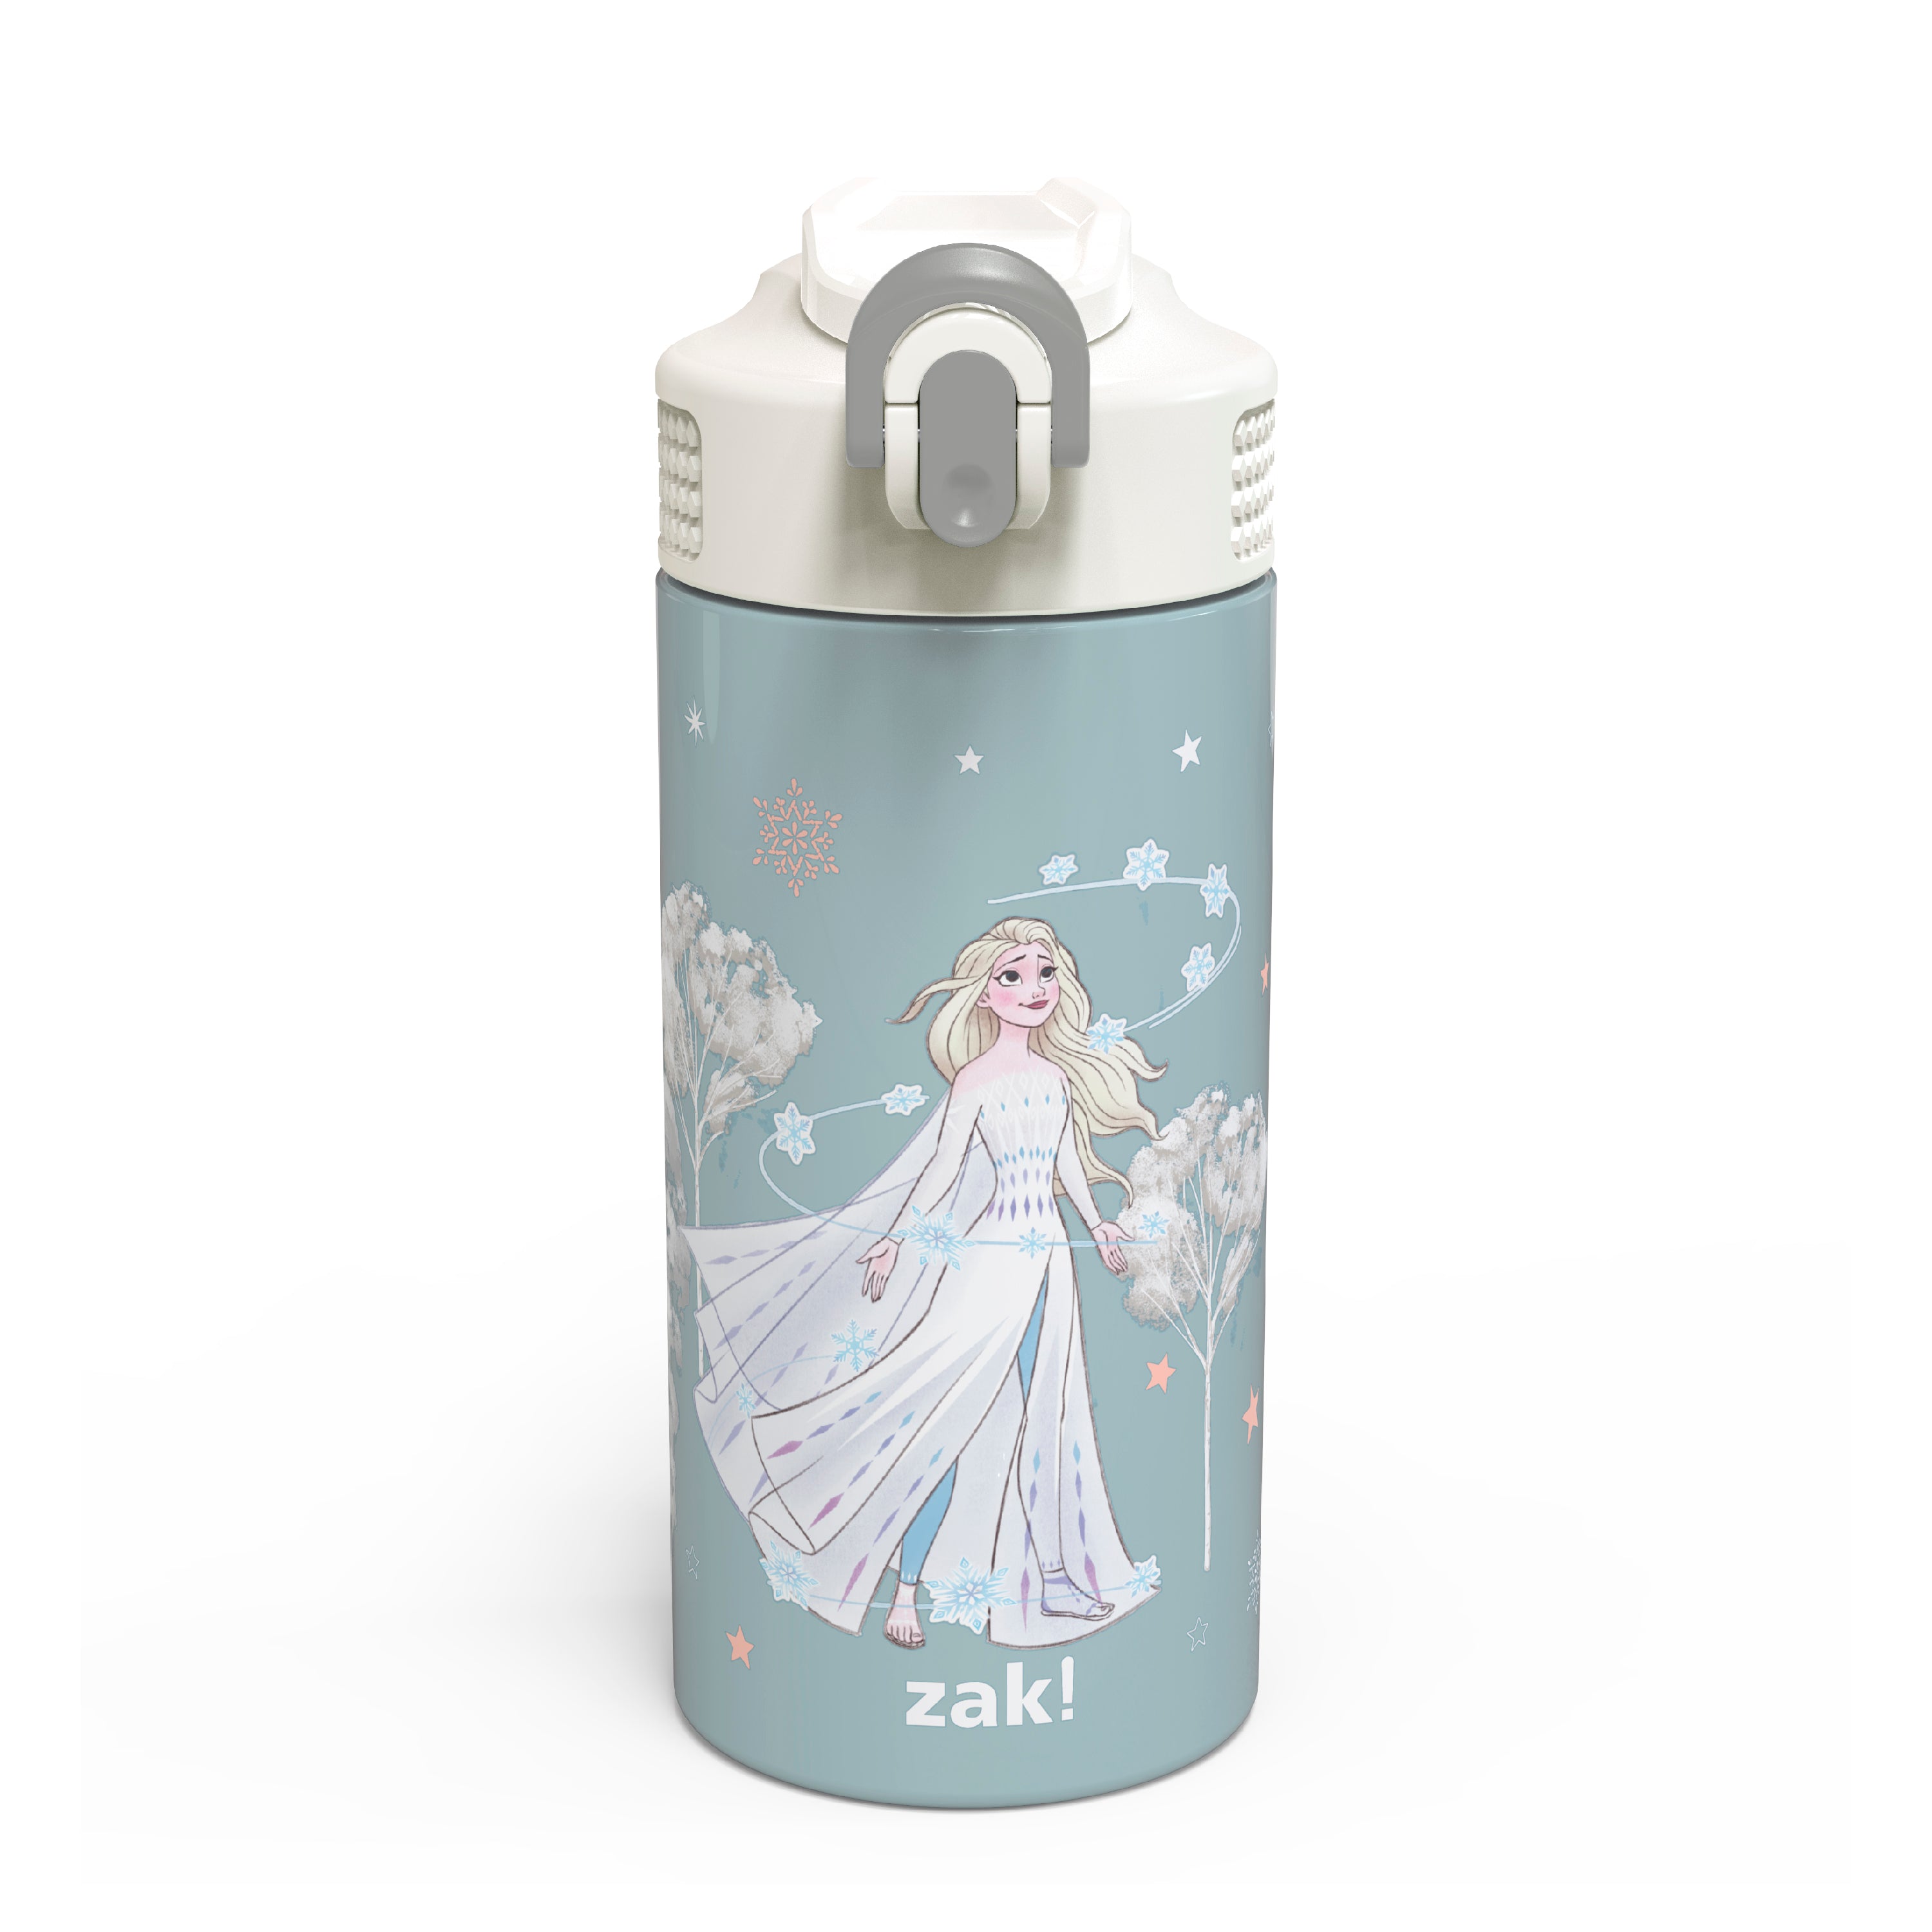  Zak Designs, Inc. Frozen 2 Stainless Steel Bottle for Kids -  Disney Frozen Kids Insulated Water Bottle with Push Button Spout, Perfect  Frozen 2 Water Bottle for Kids School Days and